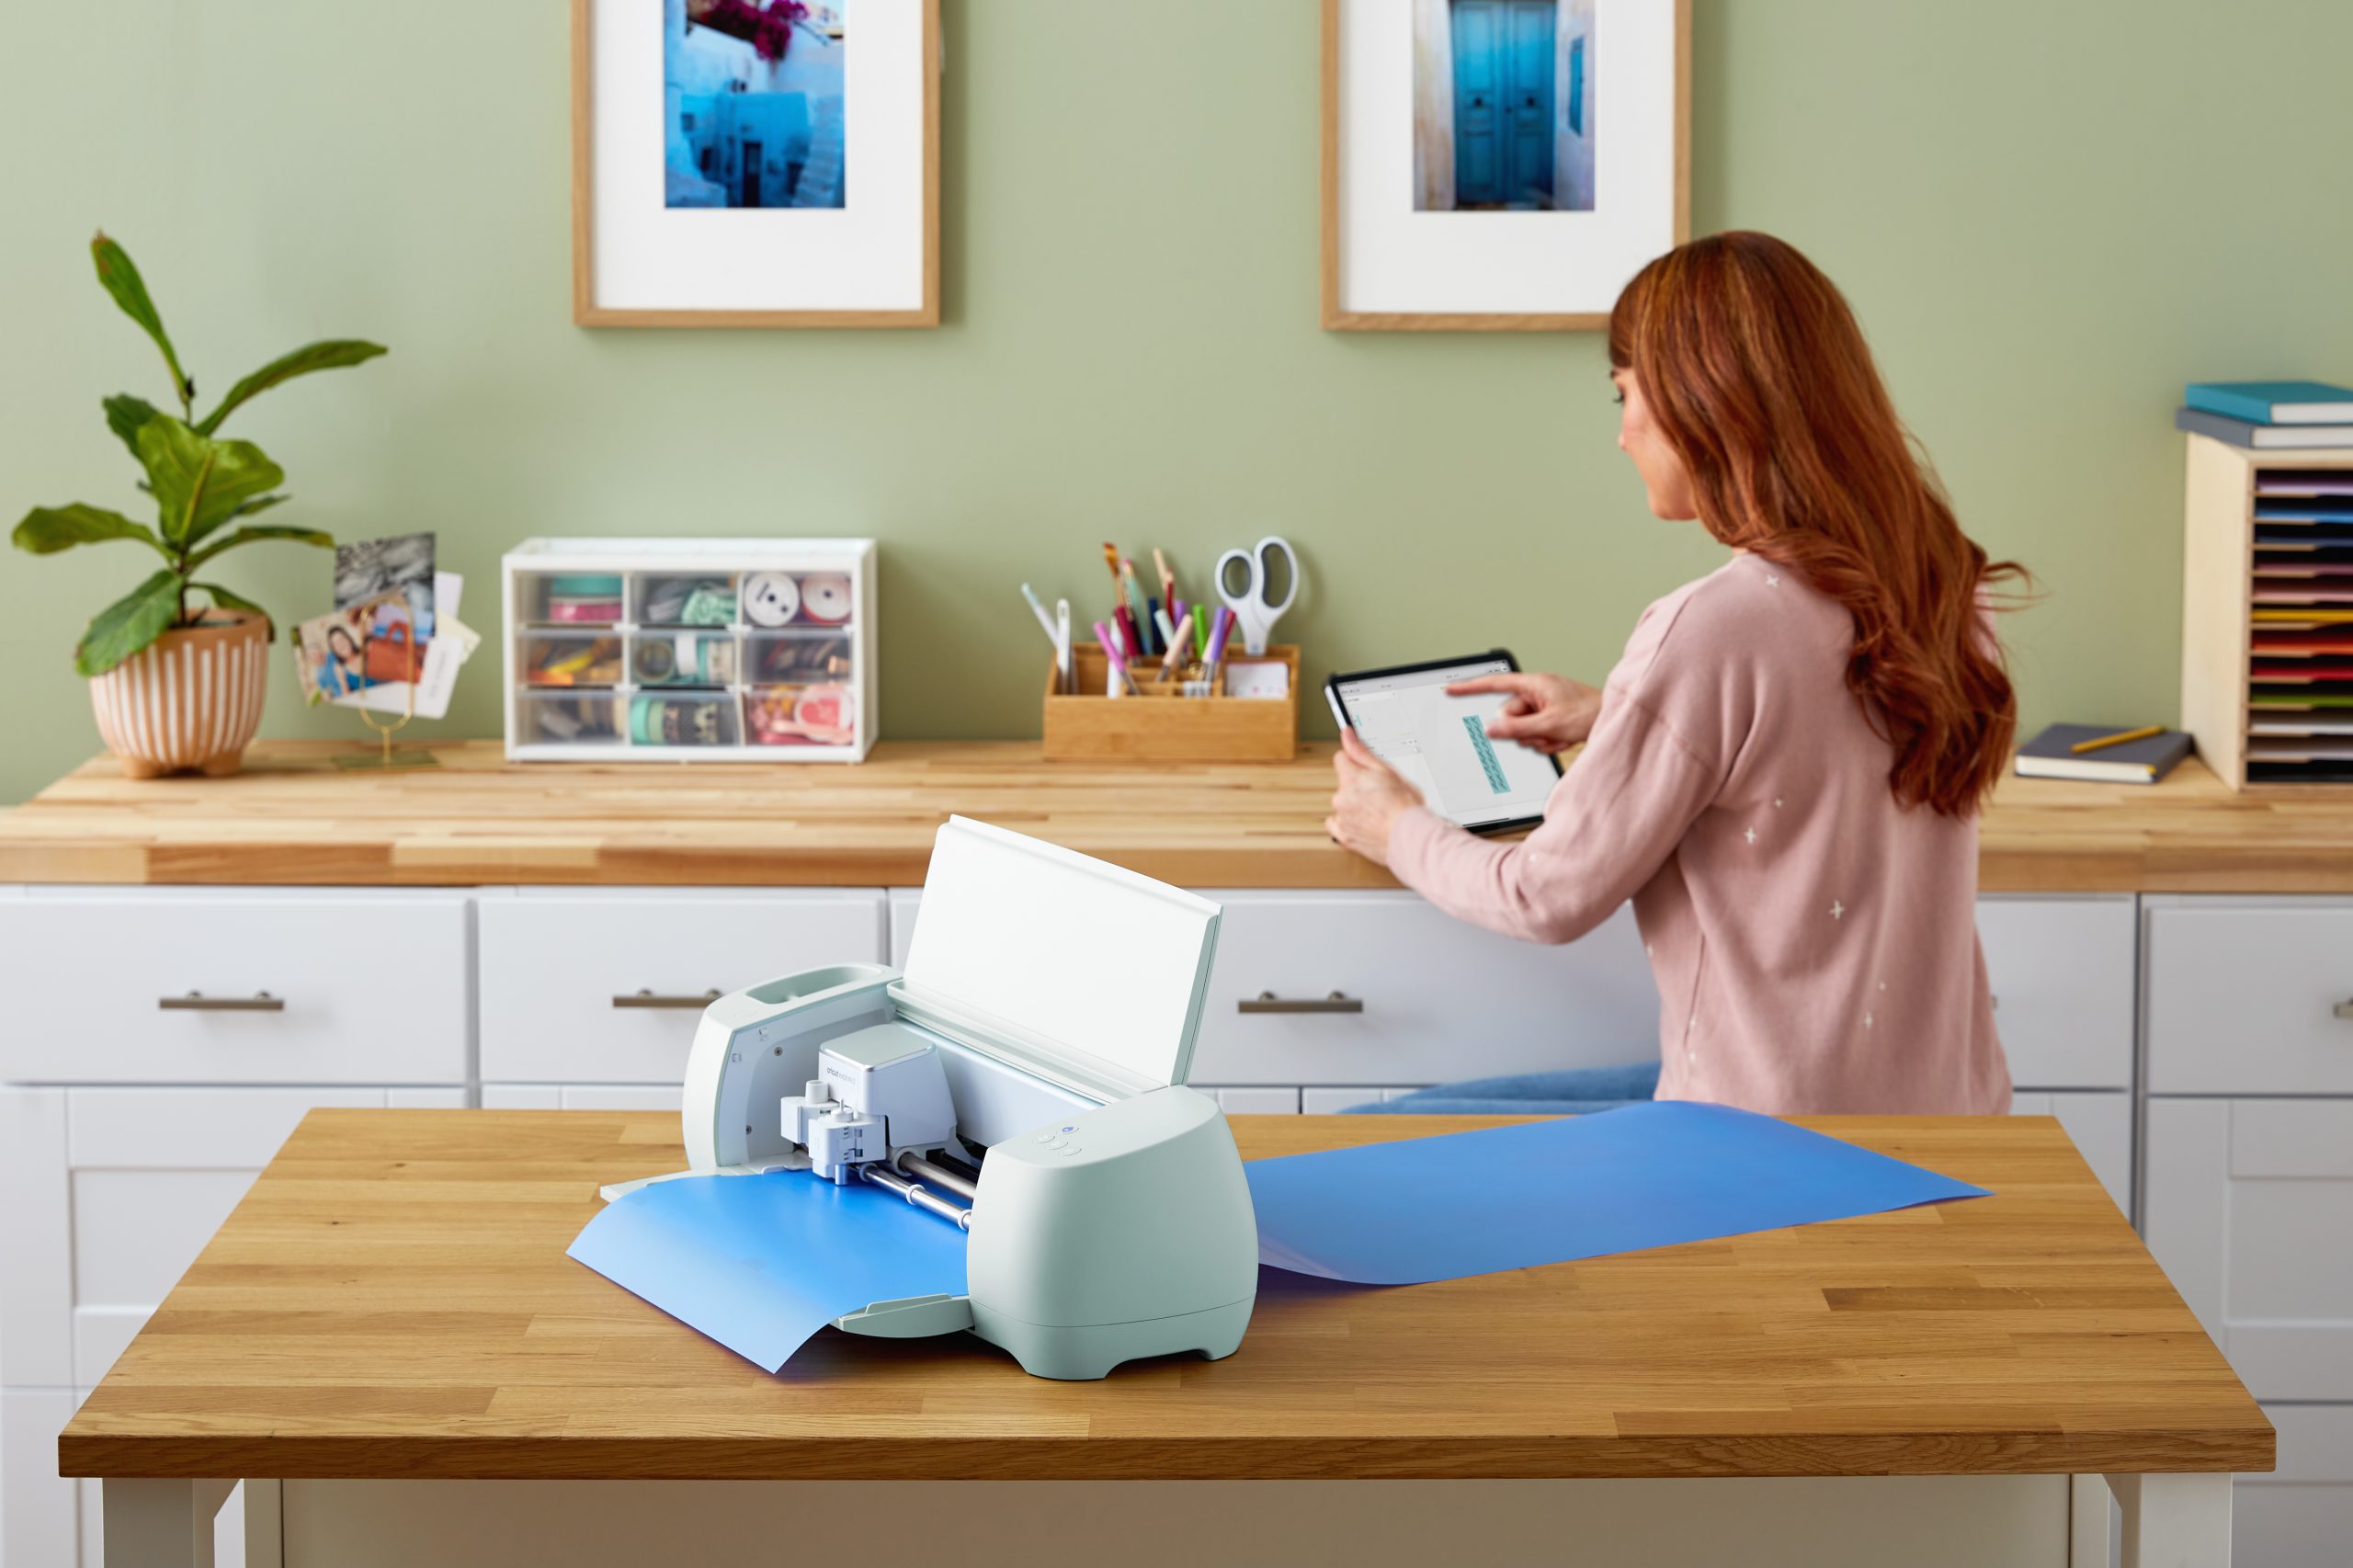 Join the all-new Cricut machine preview event for your chance to win.